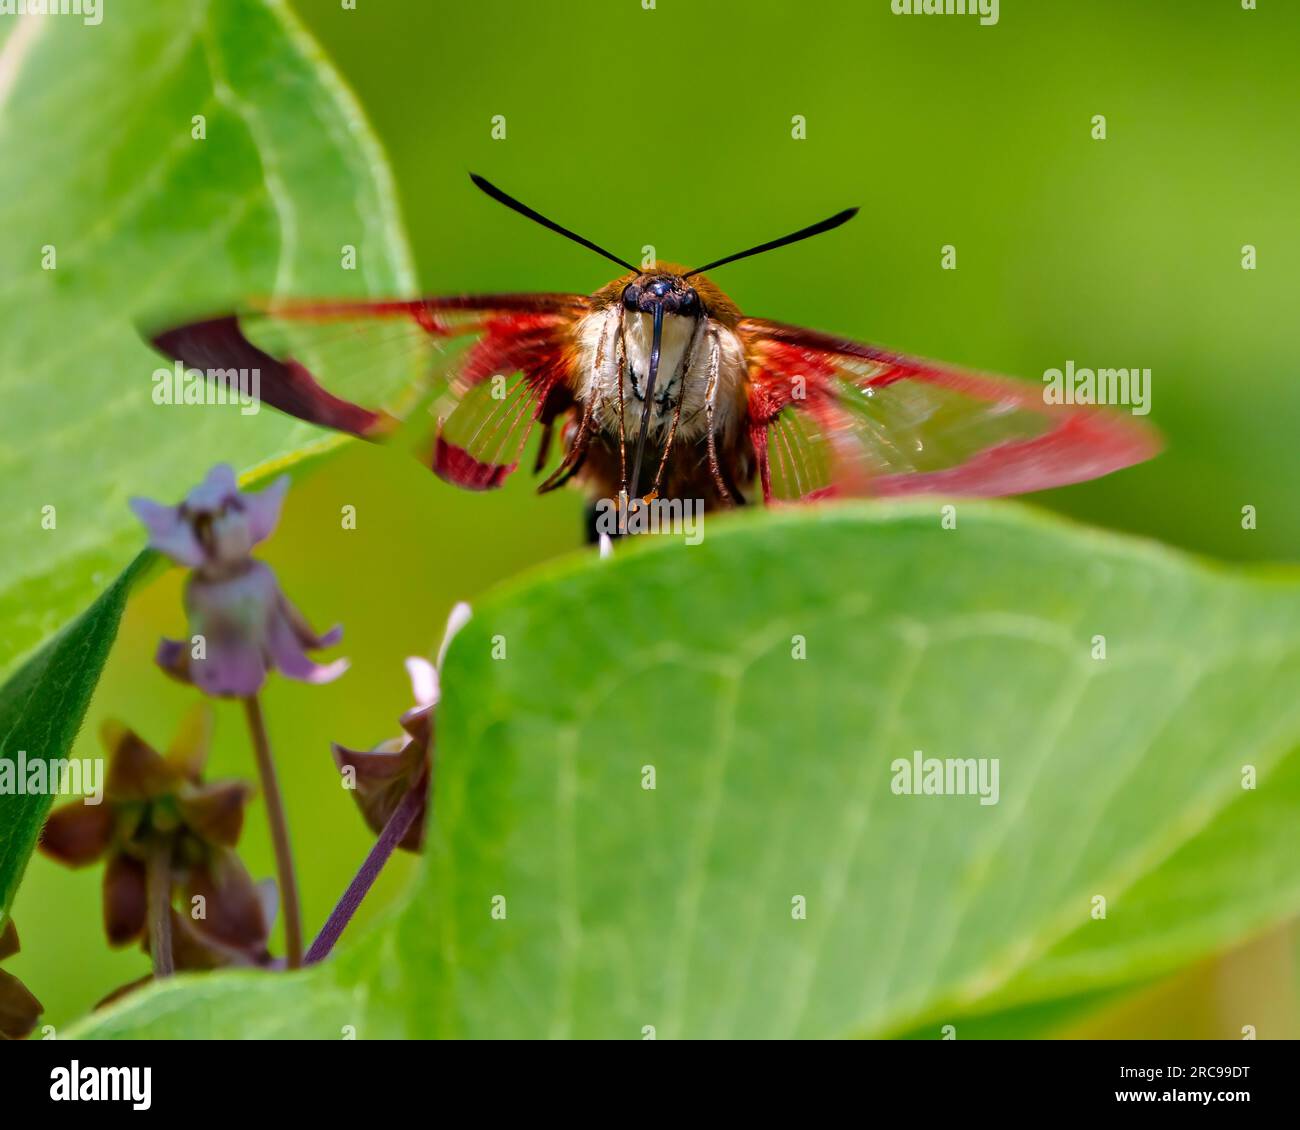 Hummingbird Clear wing Moth close-up front view fluttering over a leaf with a green background in its environment and habitat surrounding. Stock Photo